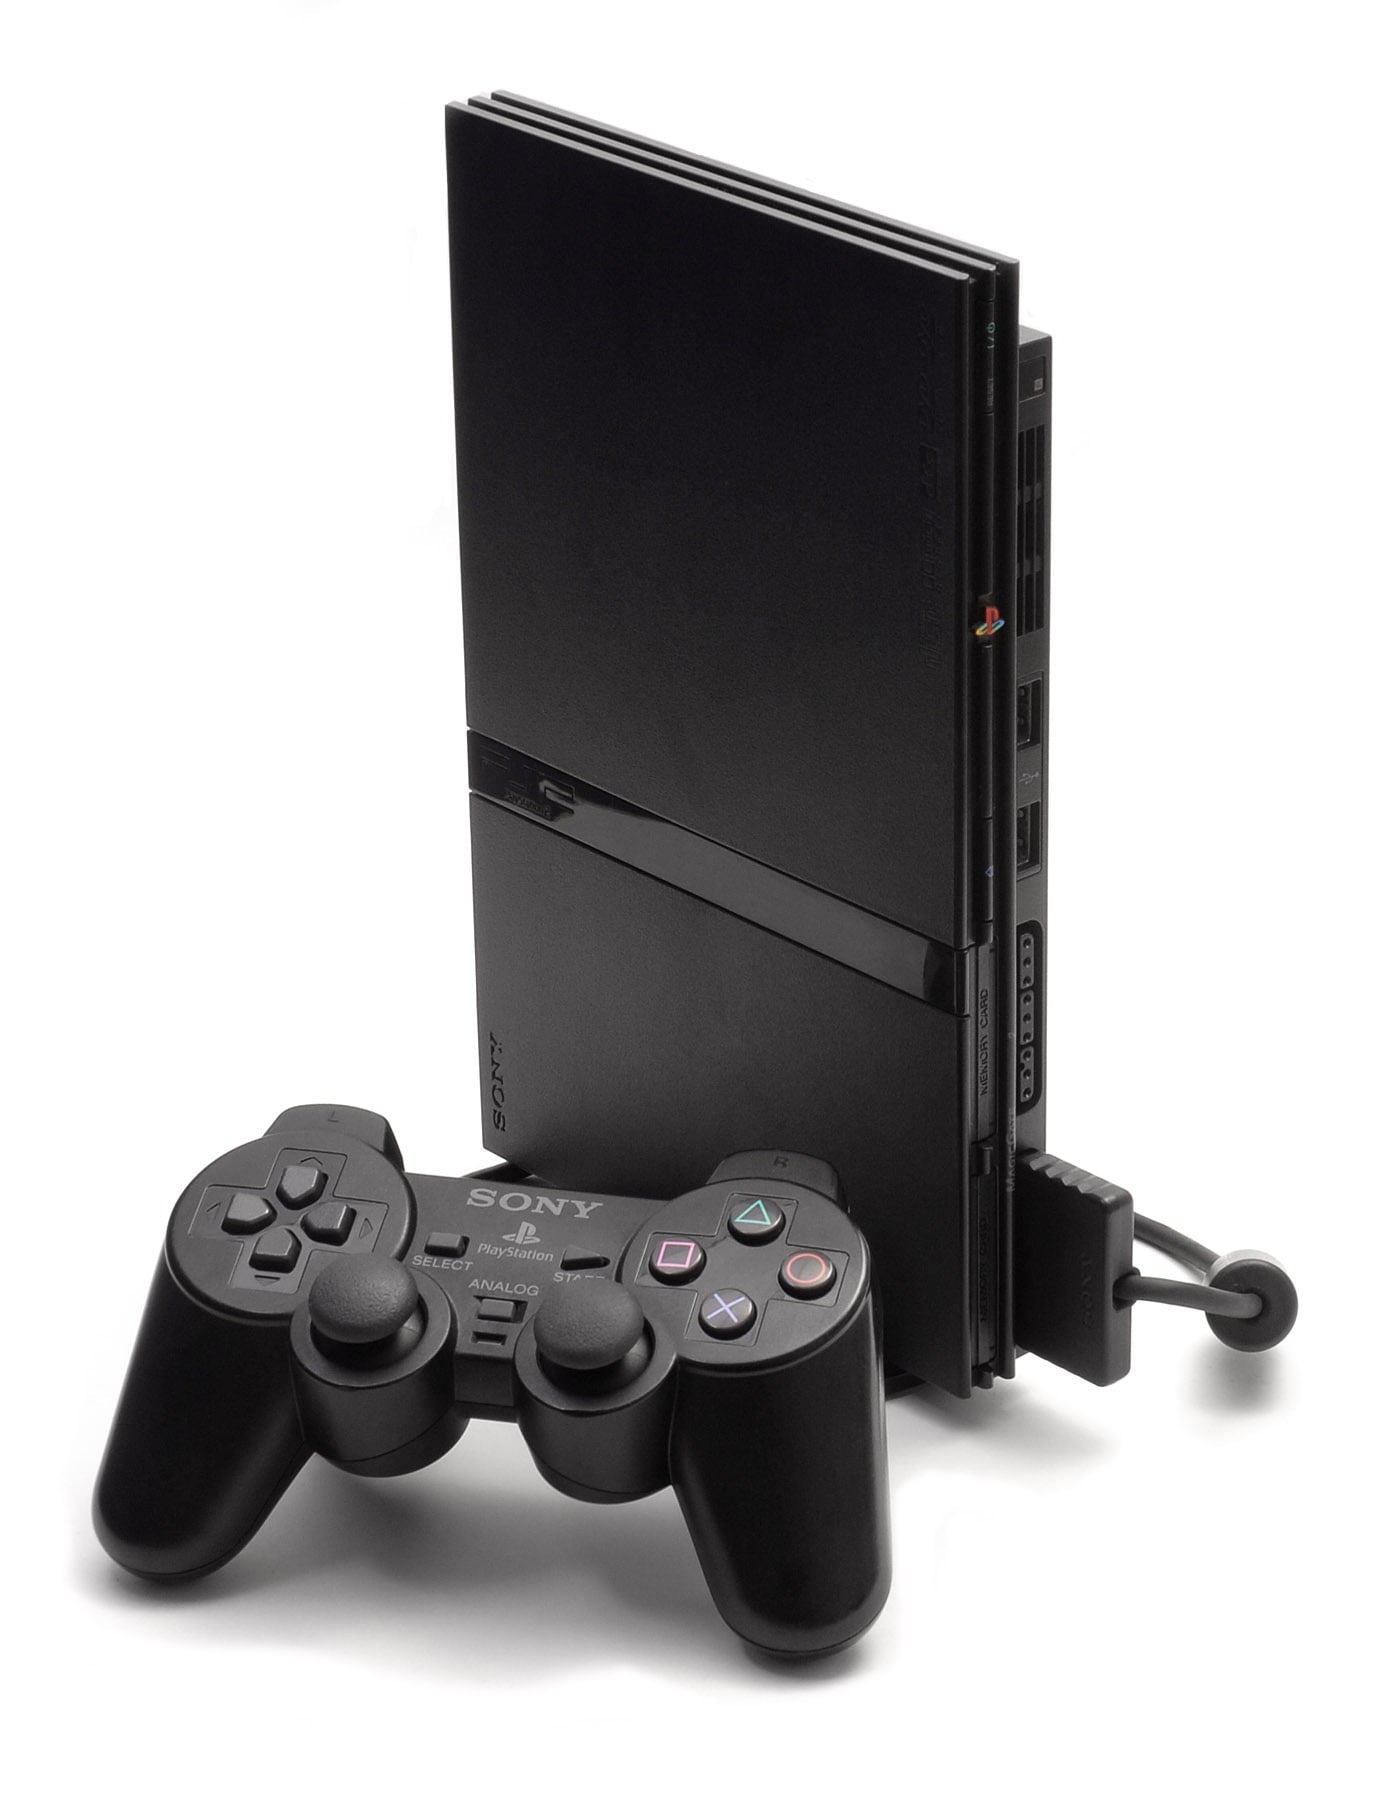 Restored Sony PlayStation 2 PS2 Slim Console Black Matching Controller Power and Cables (Refurbished)